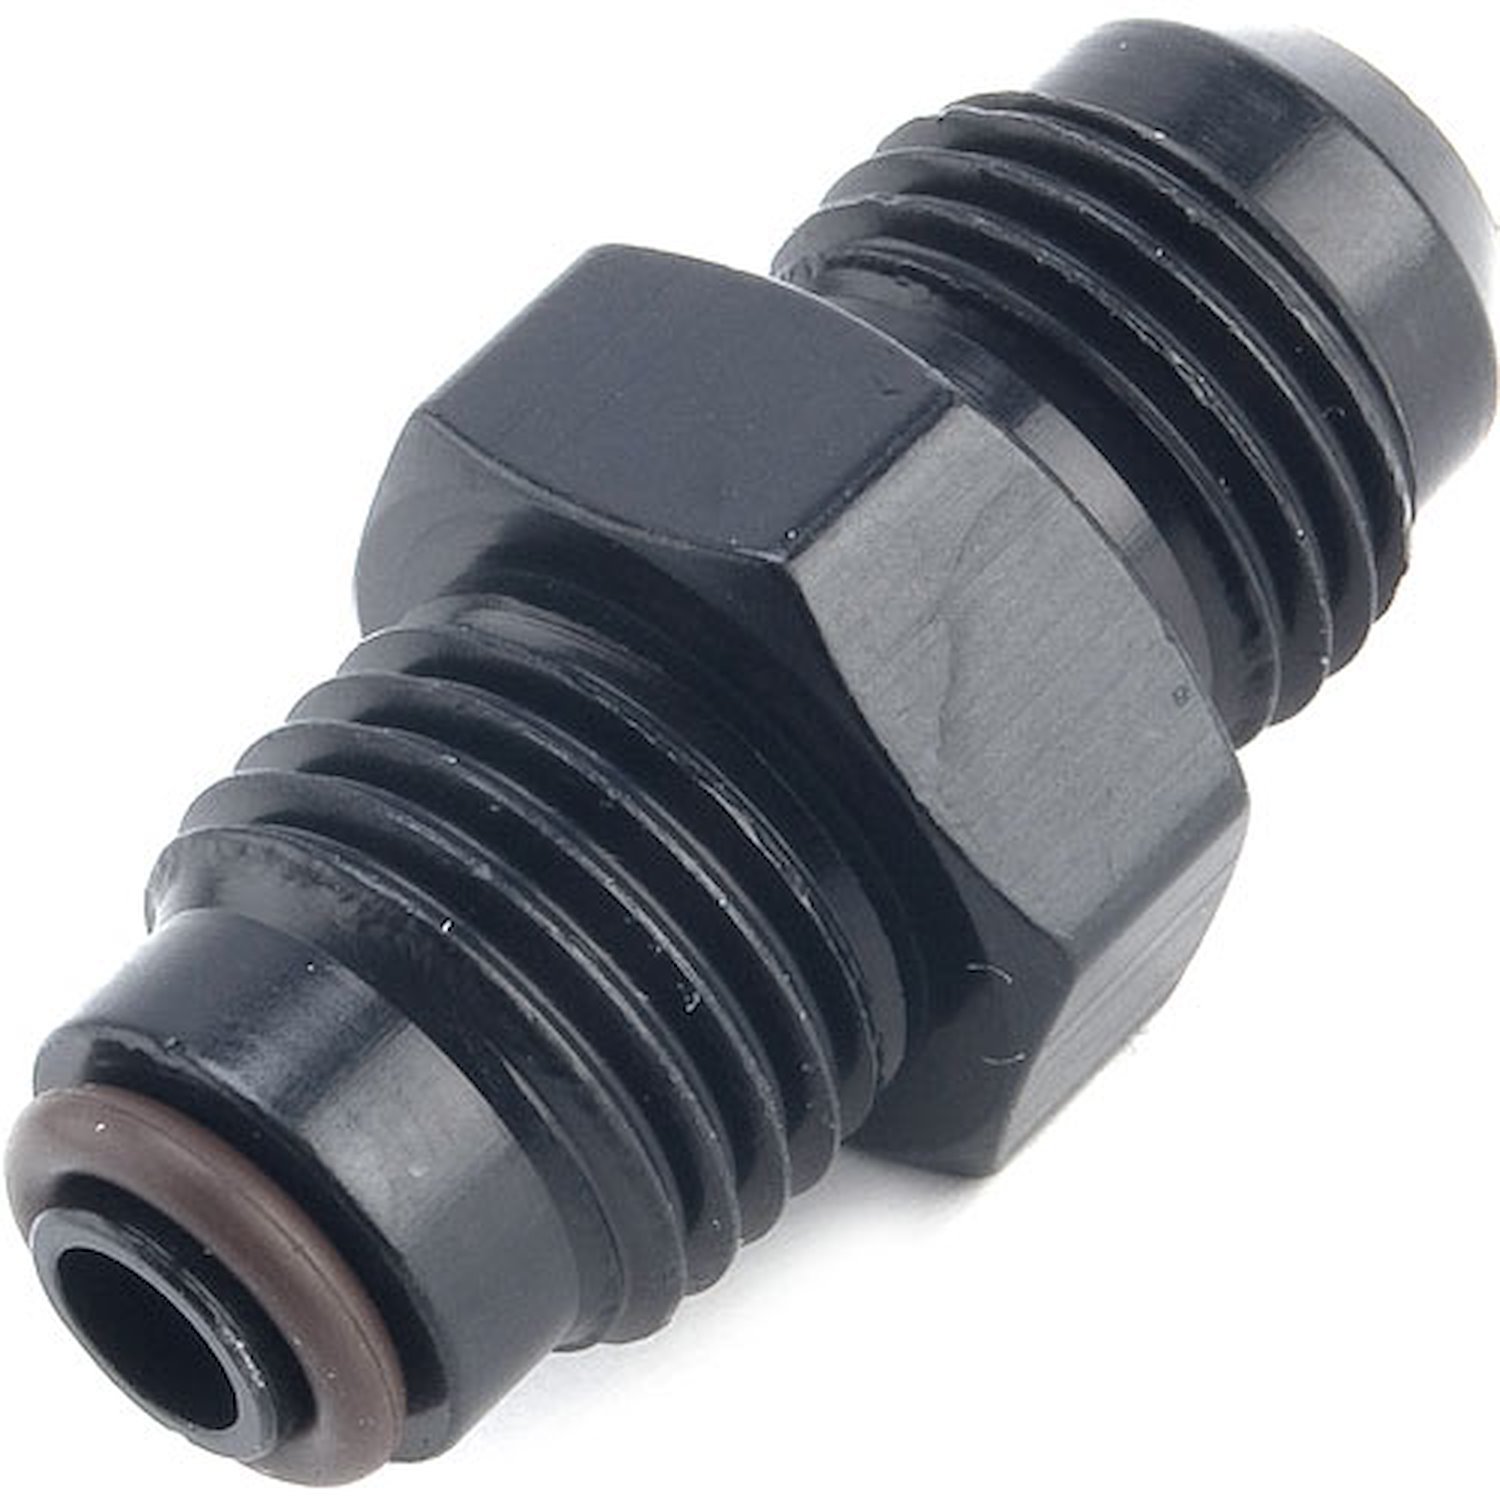 AN to Fuel Injection Adapter Fitting for GM TBI [-6 AN Male to 14mm x 1.5 Male with O-Ring Seal, Black]